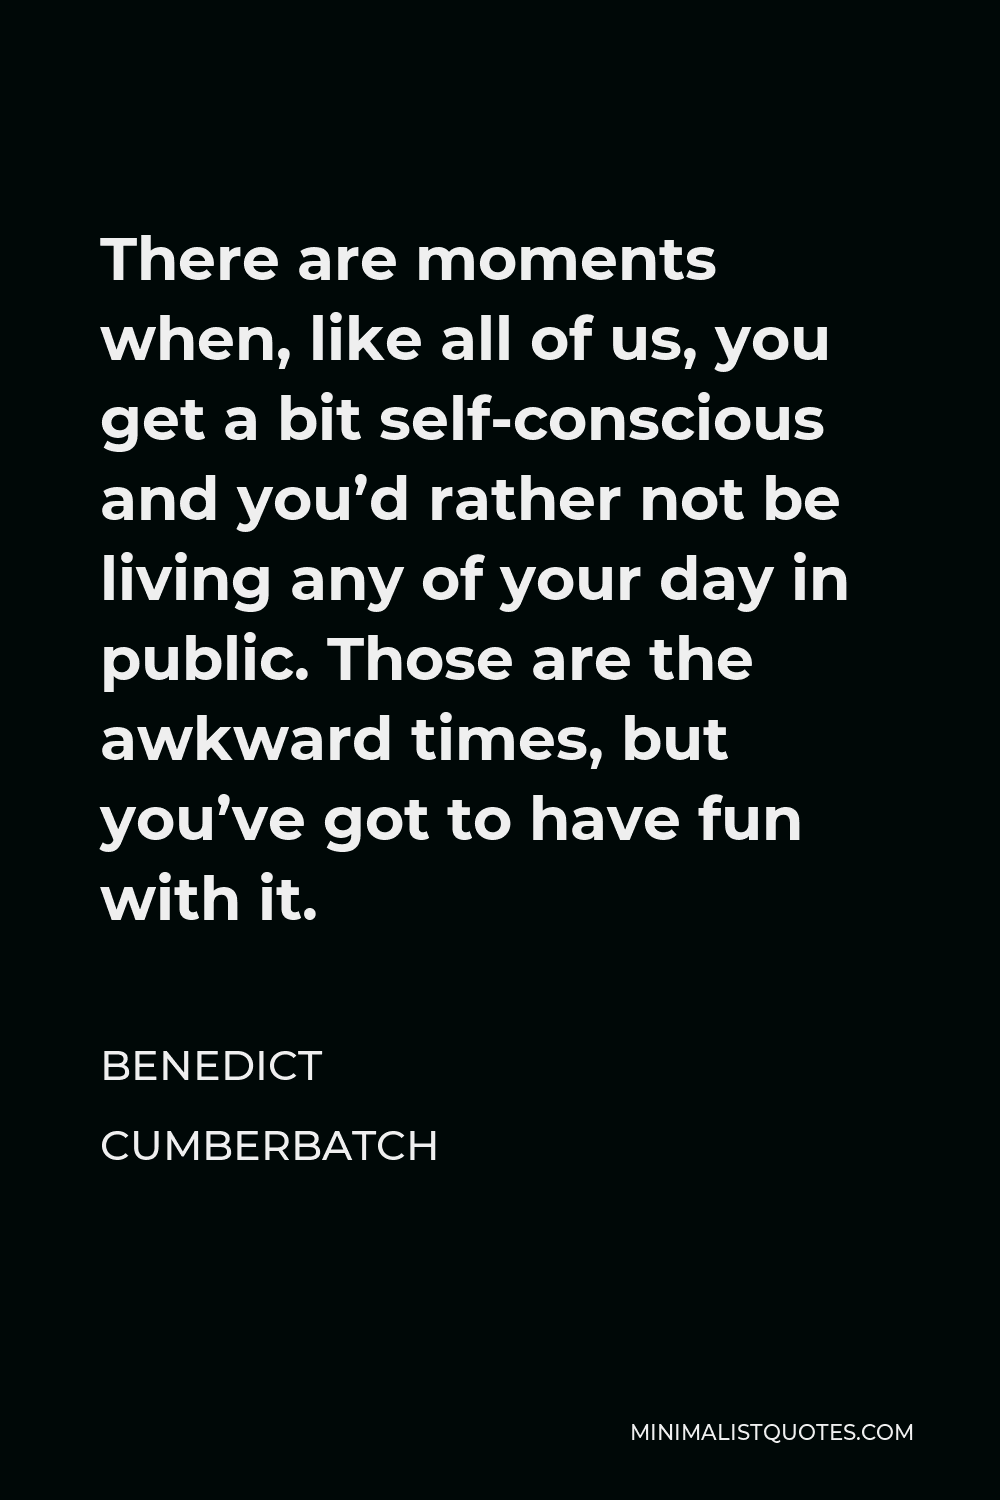 Benedict Cumberbatch Quote - There are moments when, like all of us, you get a bit self-conscious and you’d rather not be living any of your day in public. Those are the awkward times, but you’ve got to have fun with it.